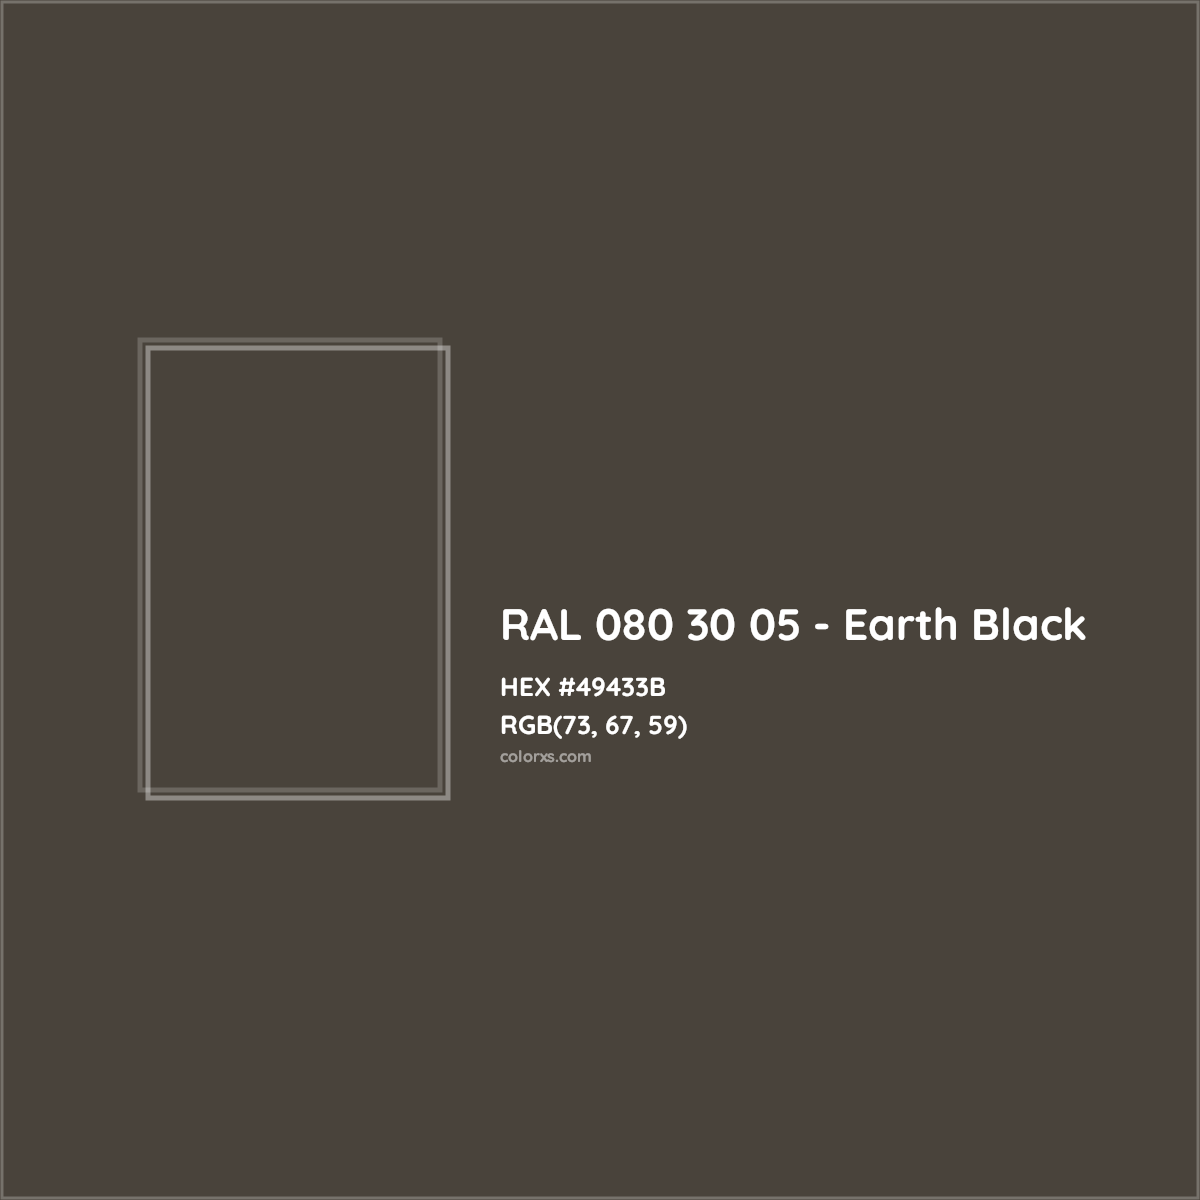 HEX #49433B RAL 080 30 05 - Earth Black CMS RAL Design - Color Code